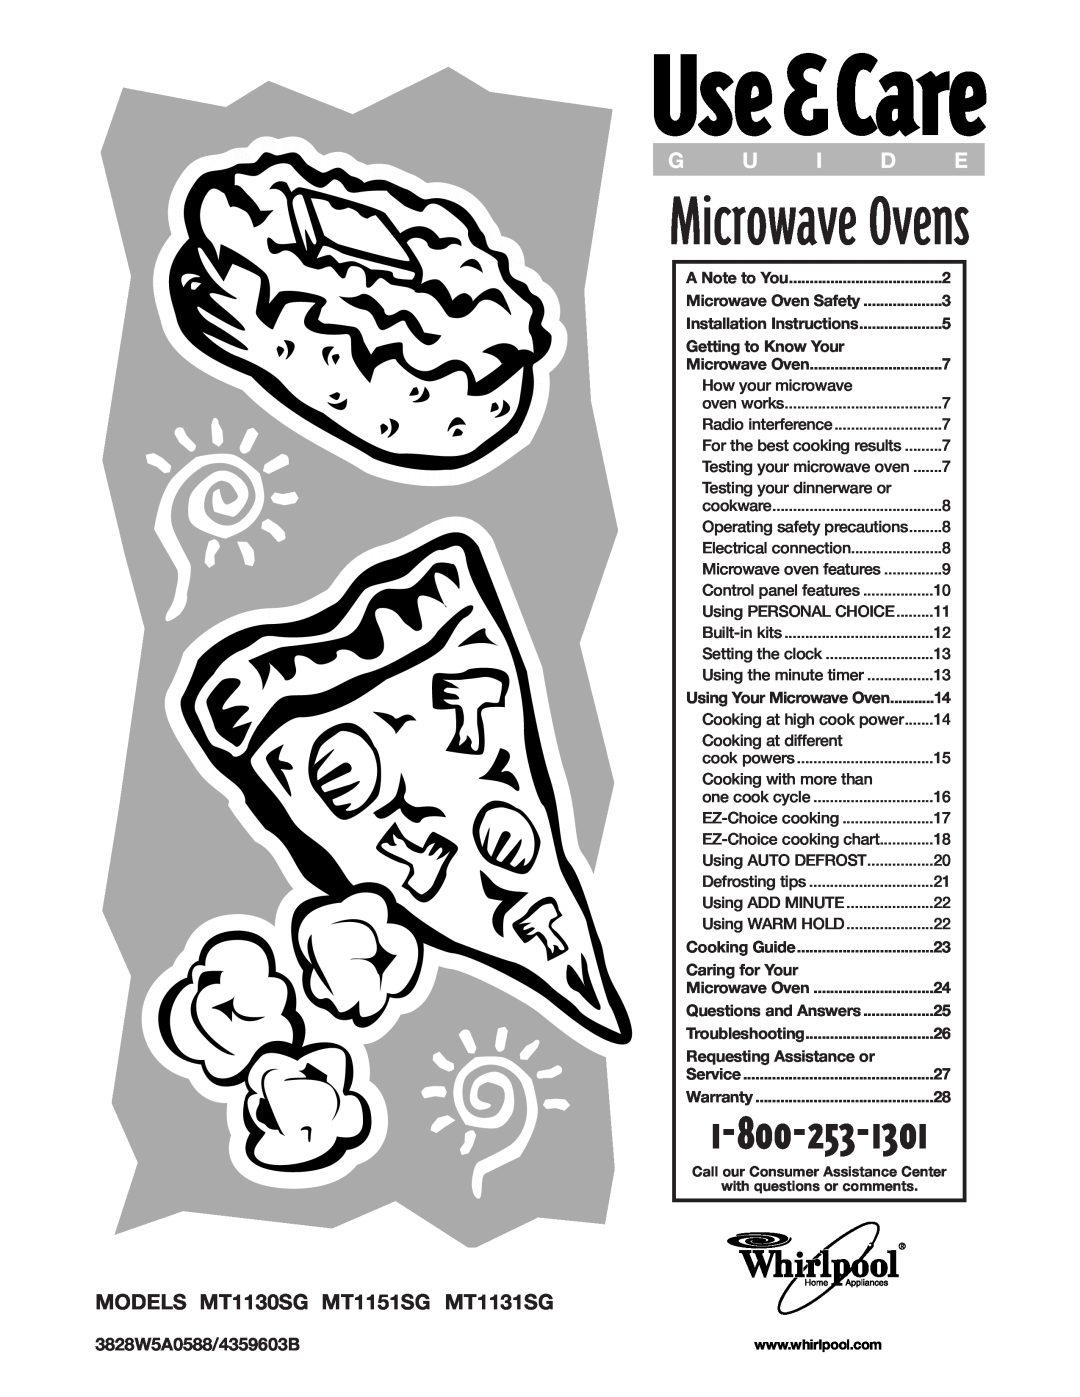 Whirlpool installation instructions Microwave Ovens, MODELS MT1130SG MT1151SG MT1131SG, A Note to You, Cooking Guide 